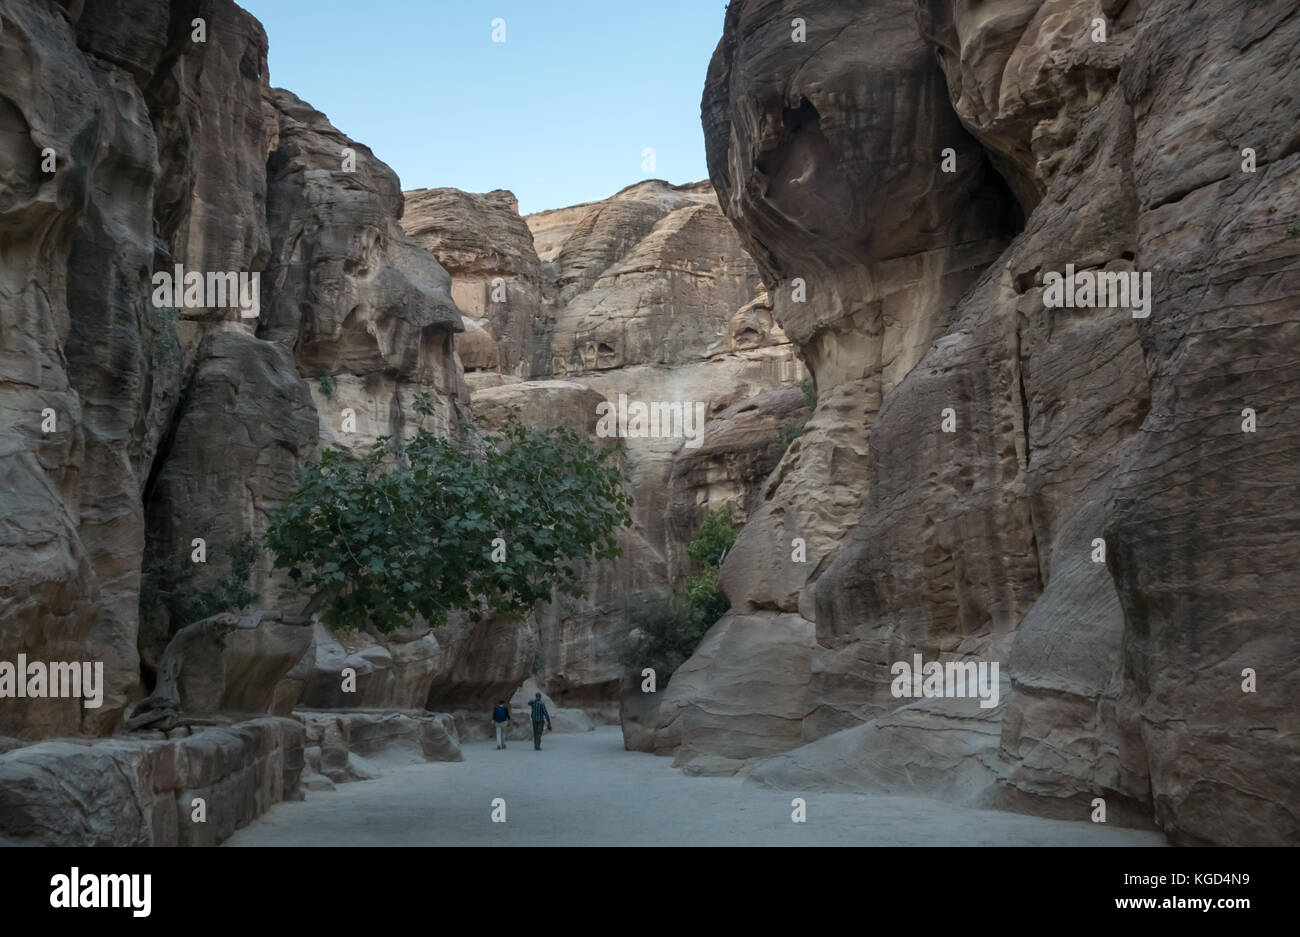 Two people walking in the Siq gorge in early morning towards the Treasury, Petra, Jordan, Middle East Stock Photo